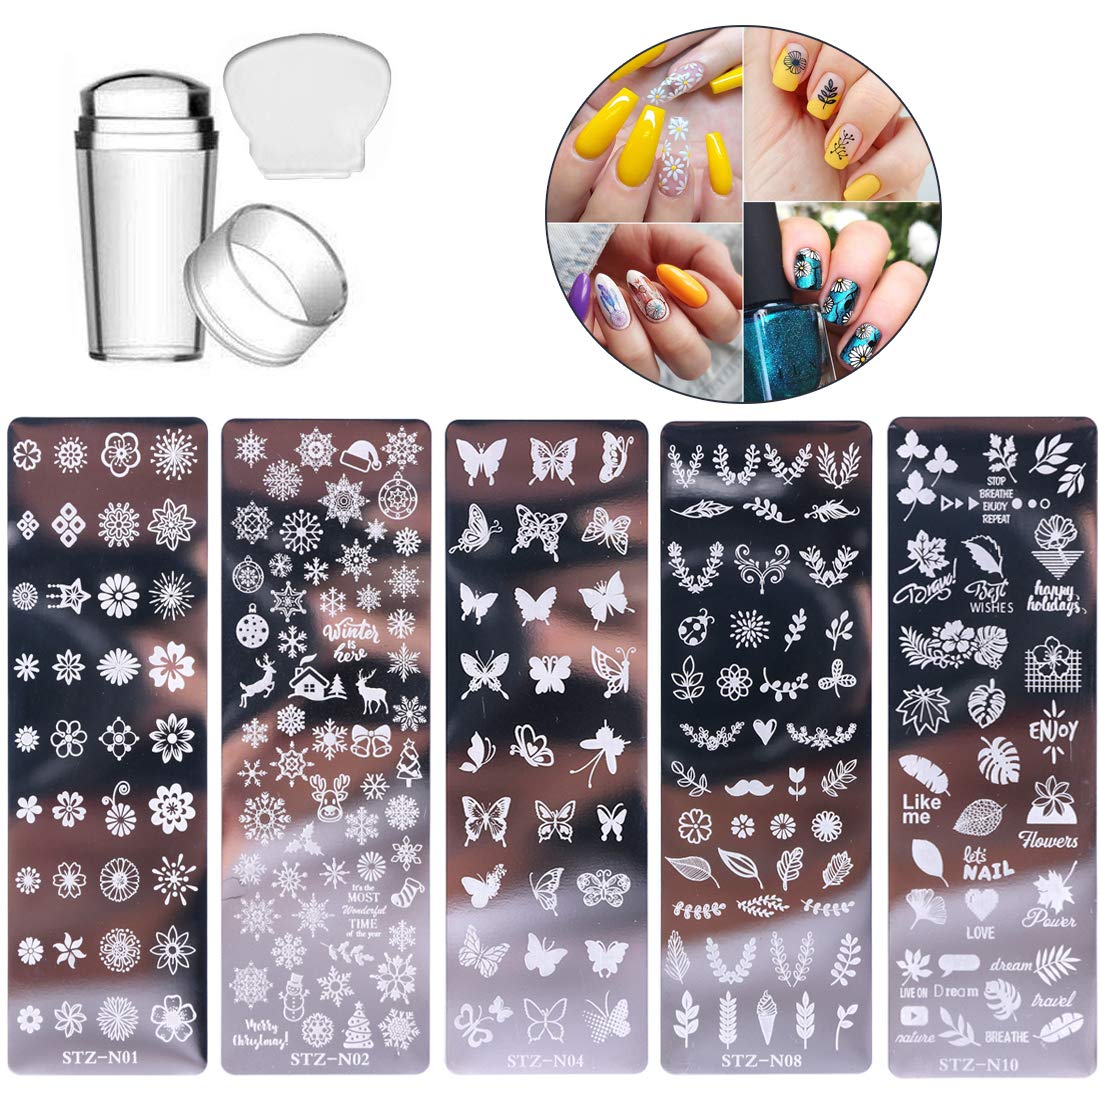 5 Pcs Nail Stamp Template Kit with 1 Stamper 1 Scraper Nail Stamping Plates  for Nail